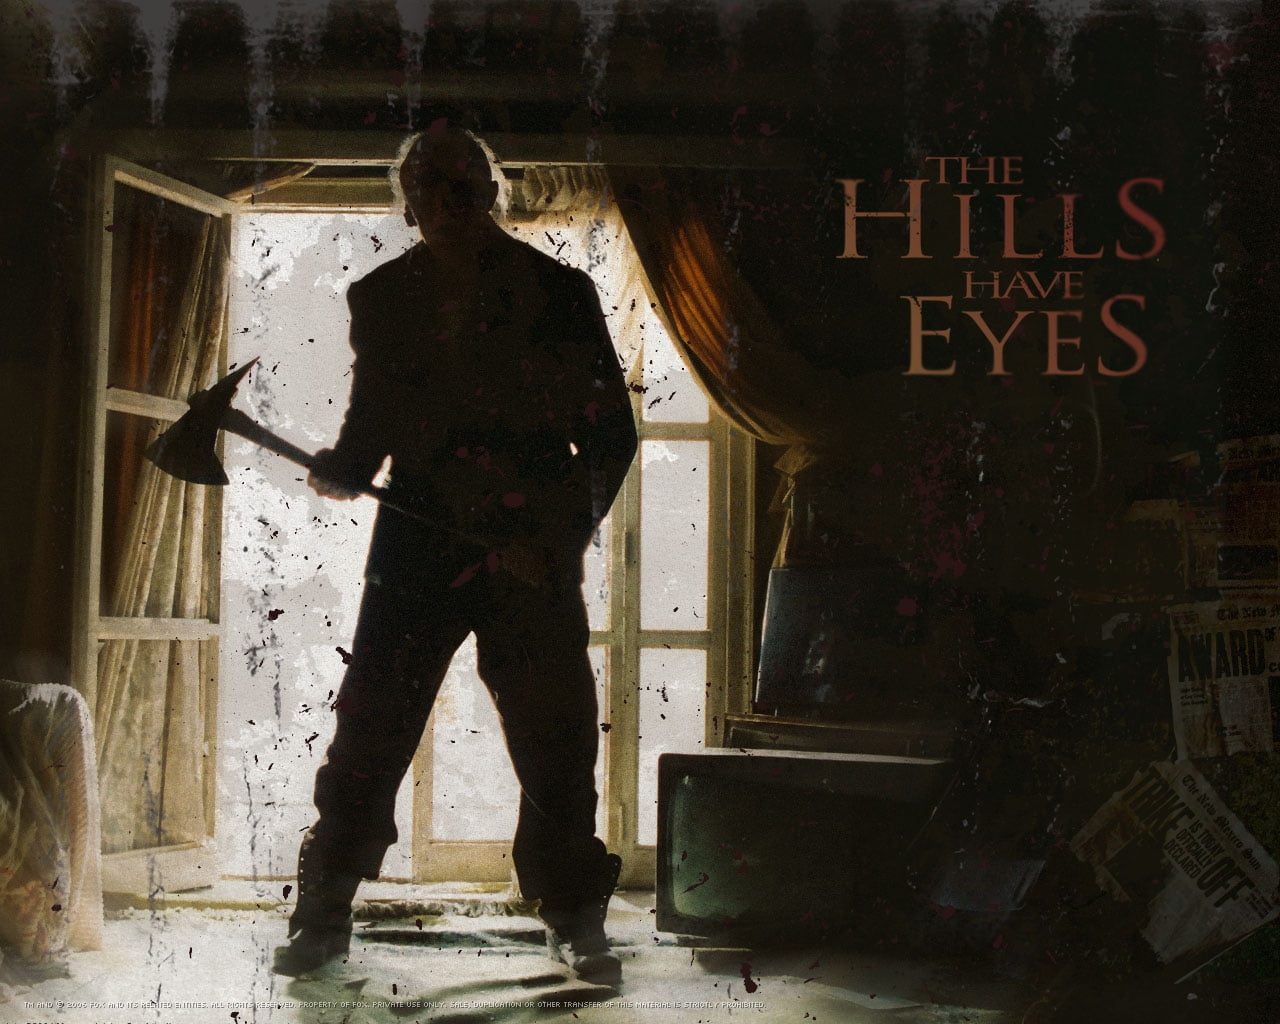 The Hills have Eyes movie